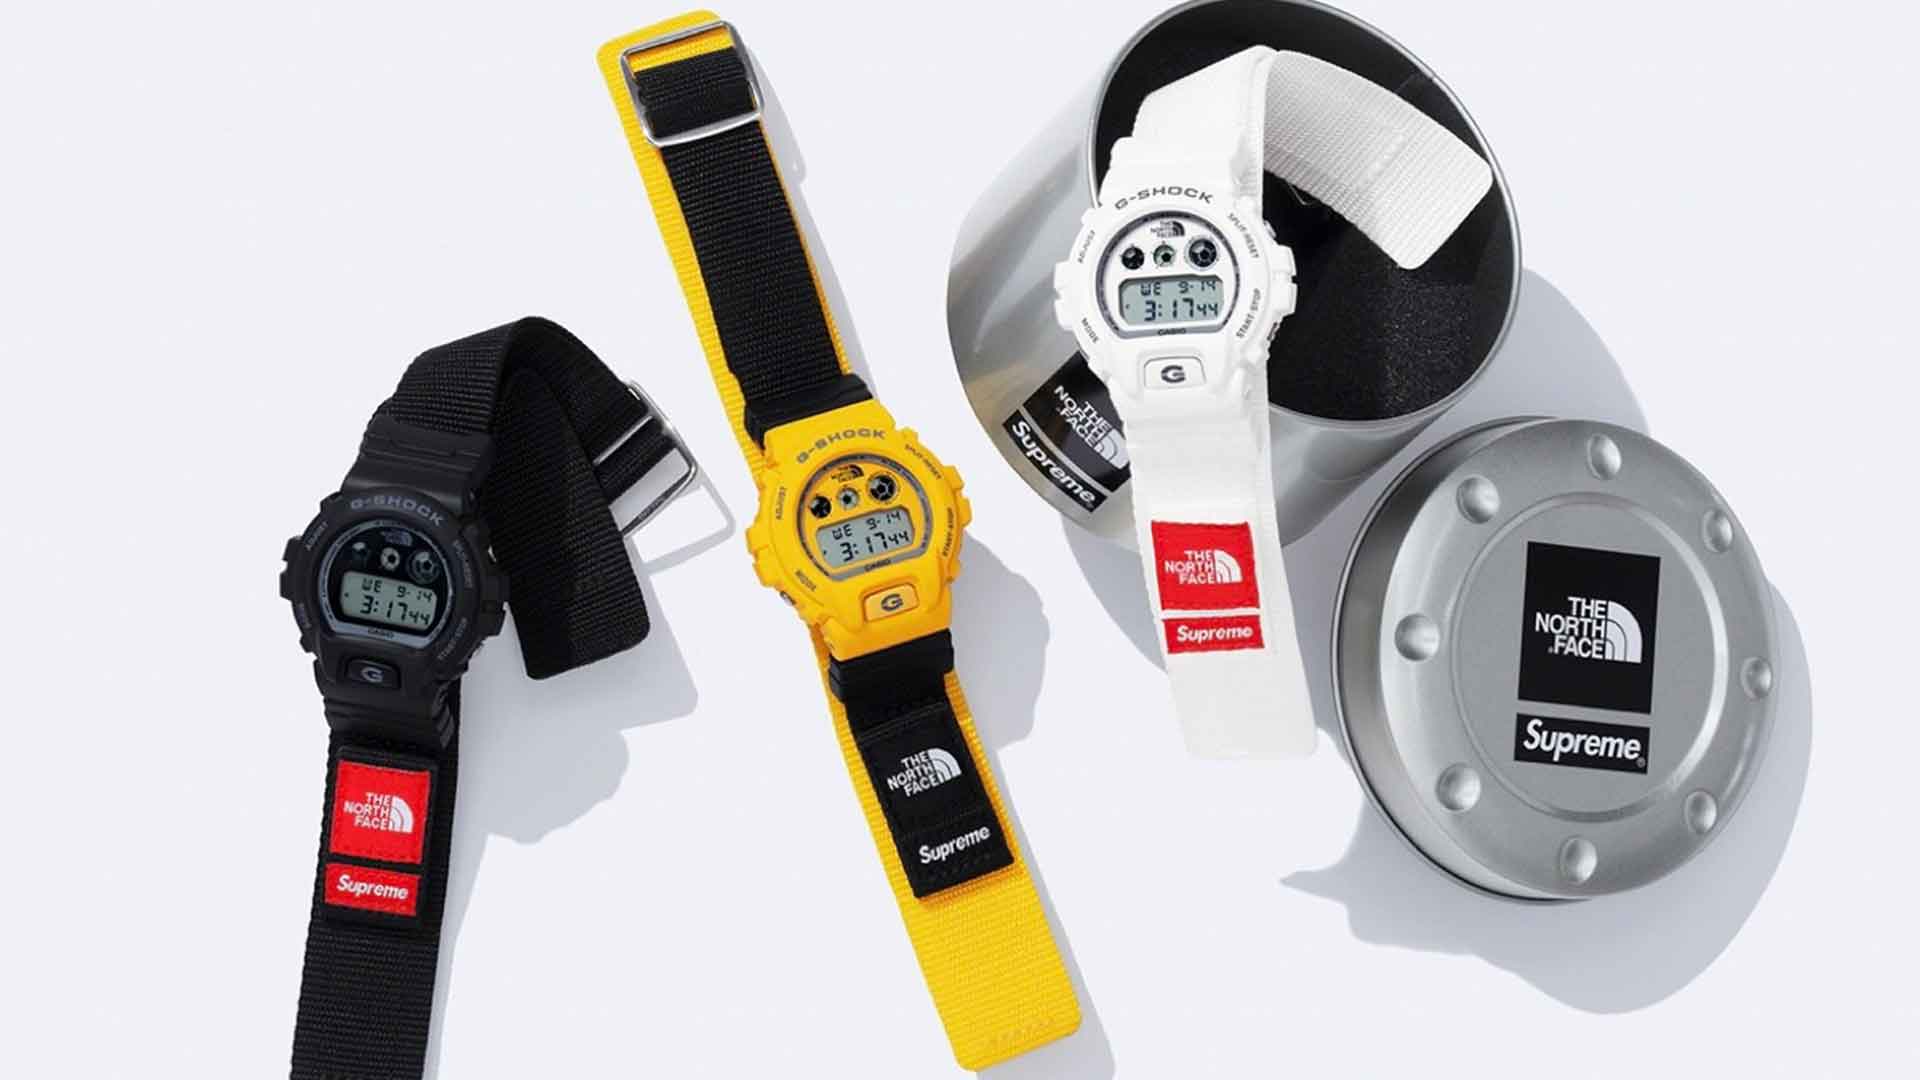 supreme the north face G-SHOCK ホワイト